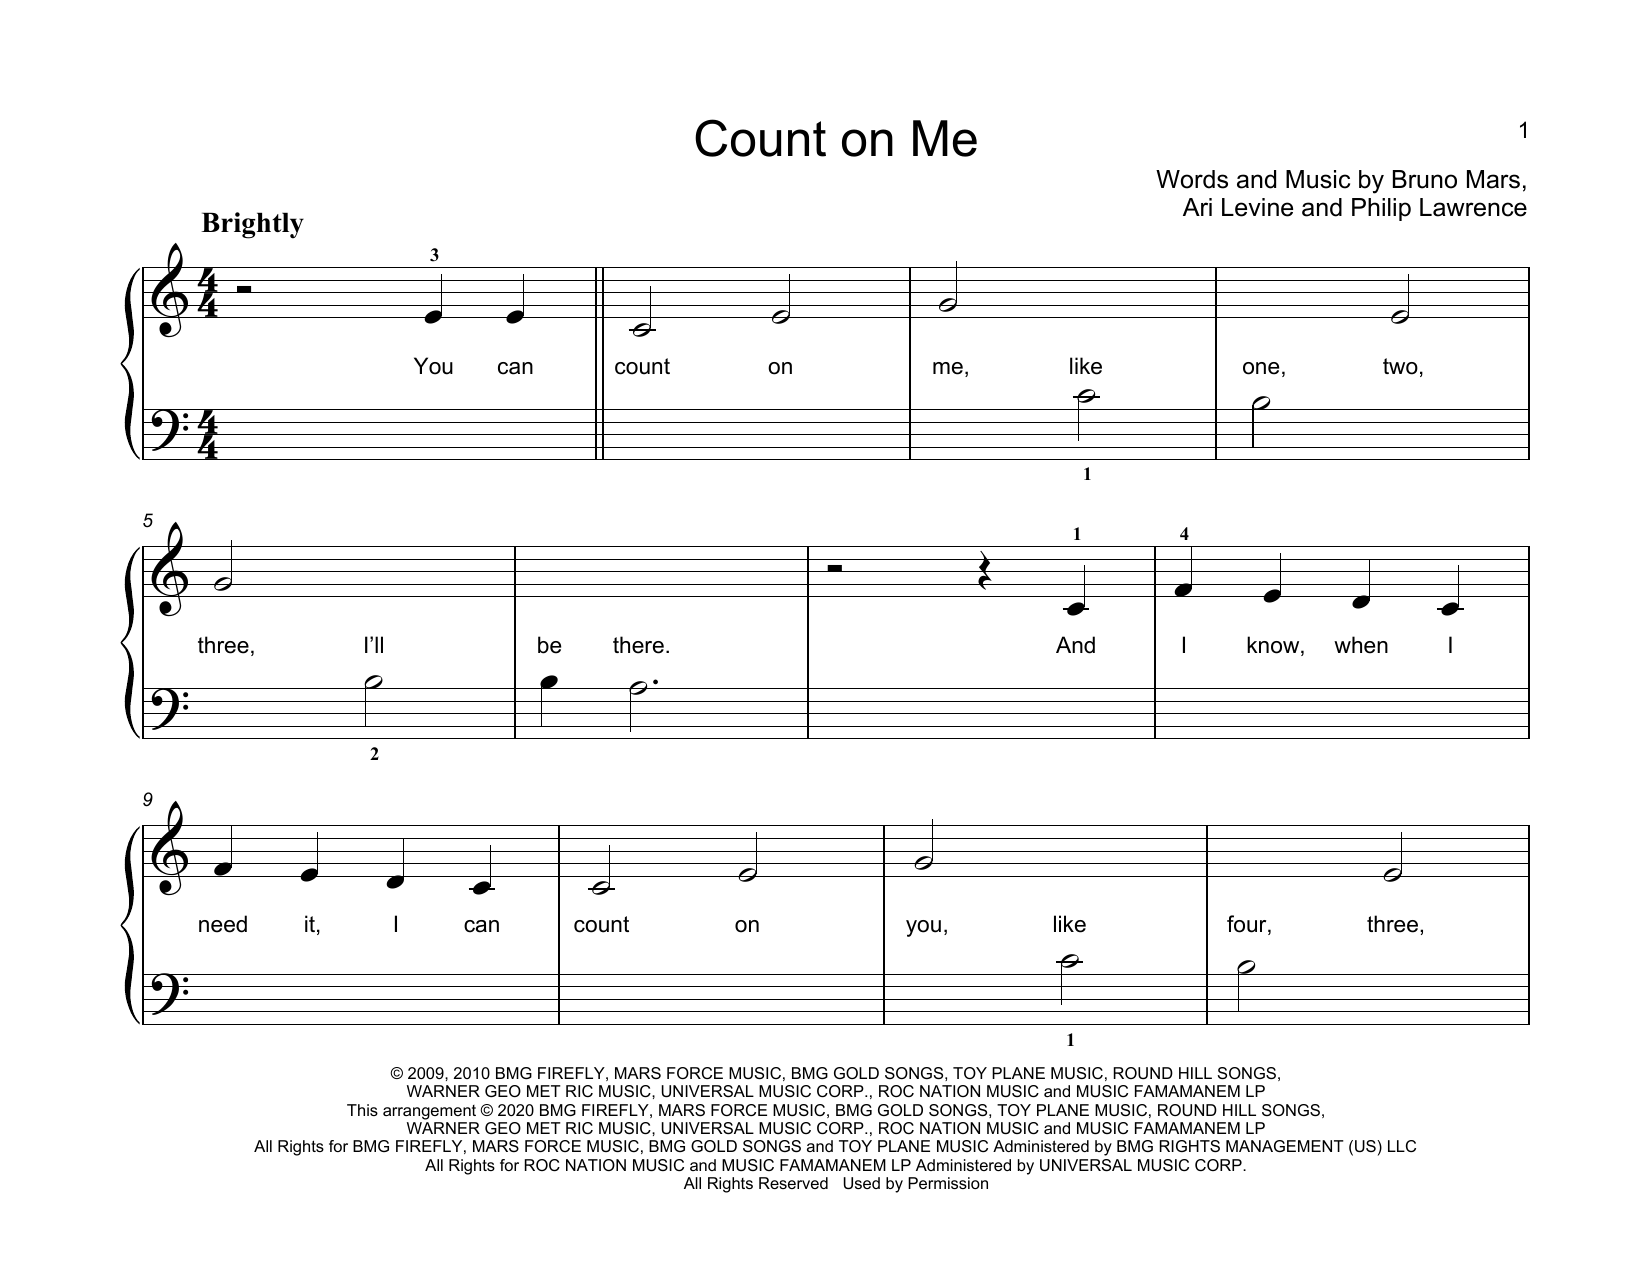 chords to bruno mars count on me